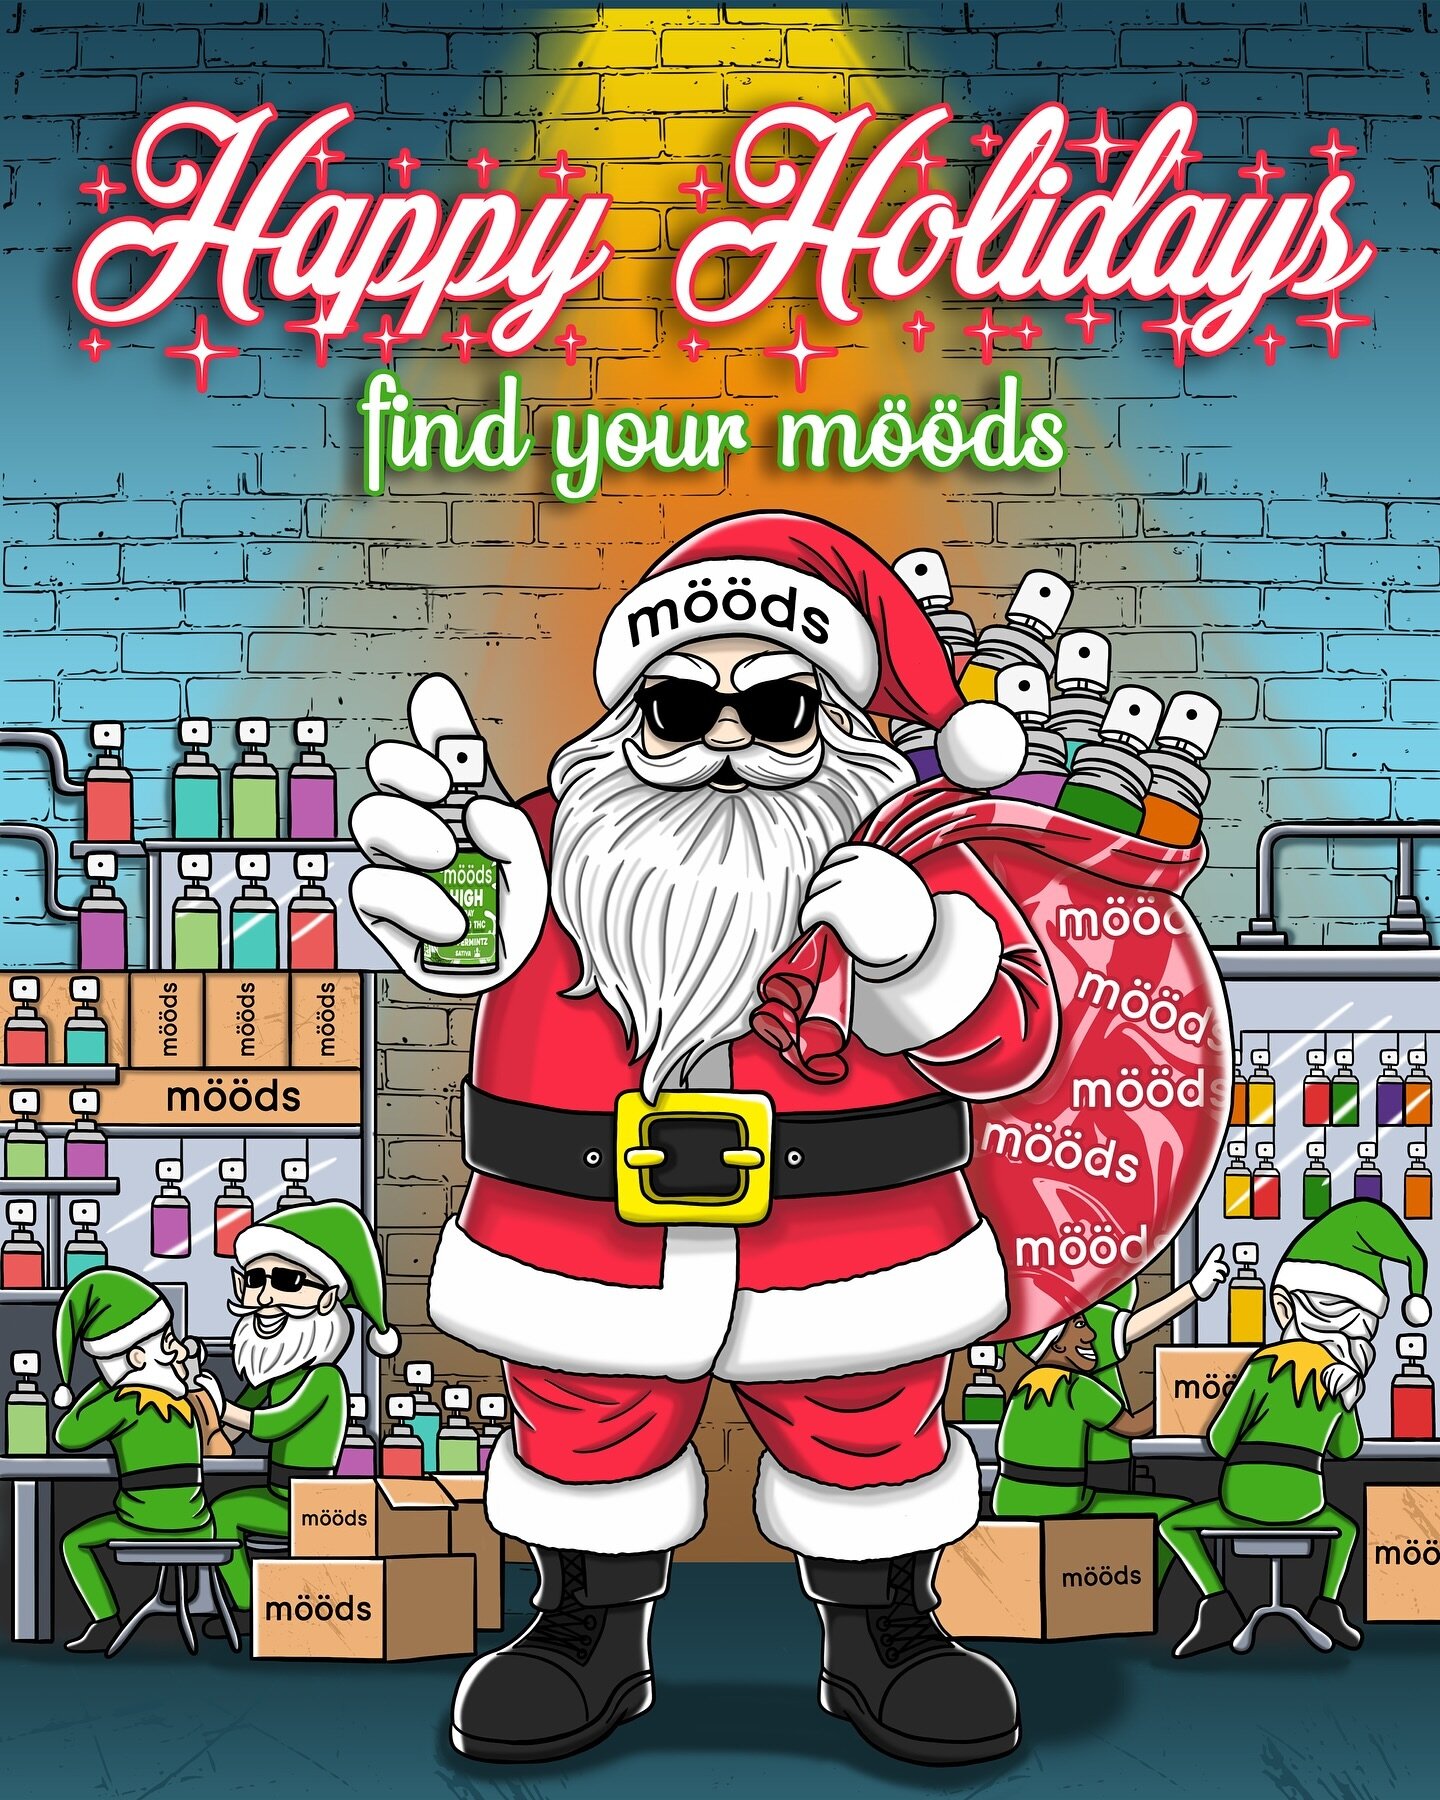 Happy Holidays! Whether you&rsquo;re naughty or nice, you deserve a m&ouml;&ouml;ds spray 😉 #findyourm&ouml;&ouml;ds